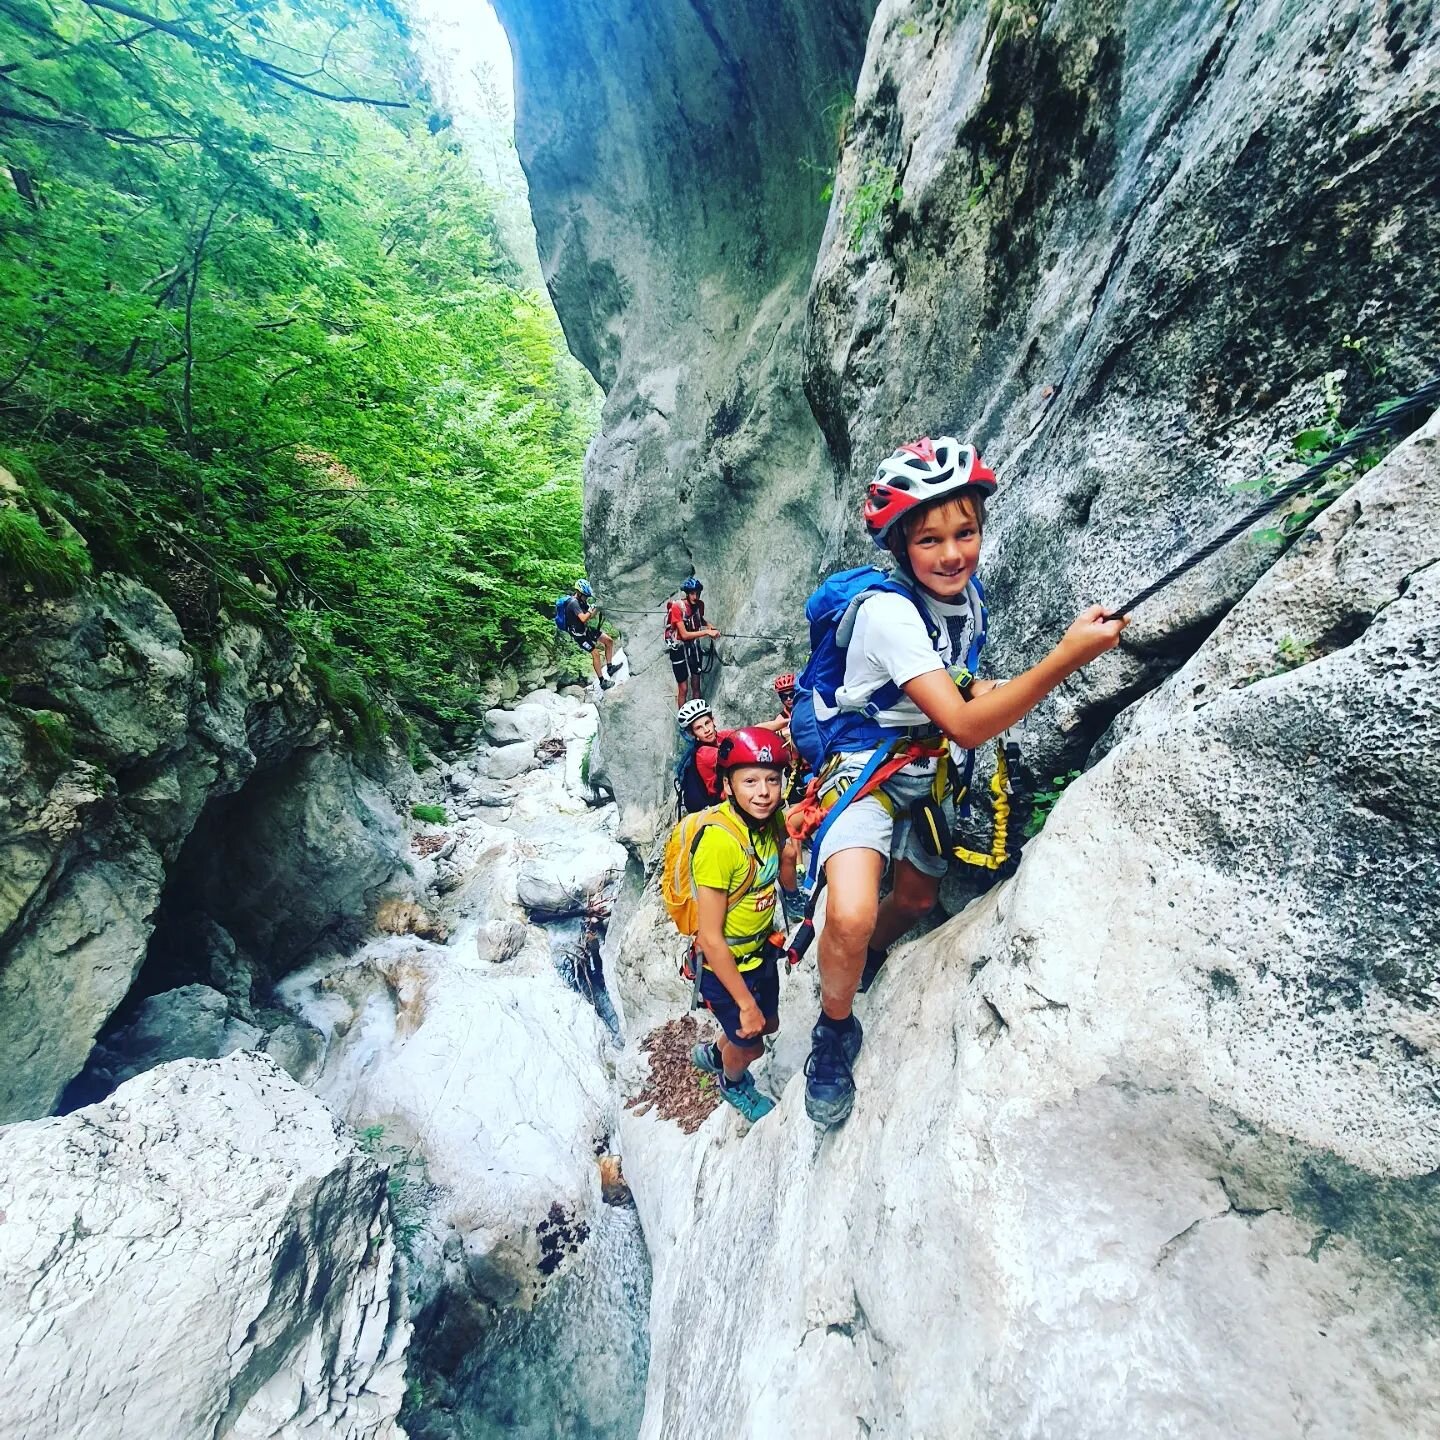 &quot;Experience is the hardest kind of teacher. It gives you the test first and the lesson afterward.&quot; #feratekranjskagora #kidsthatclimb #youngcamp #gremovhribe #gremomiposvoje #mojstranskevevrce